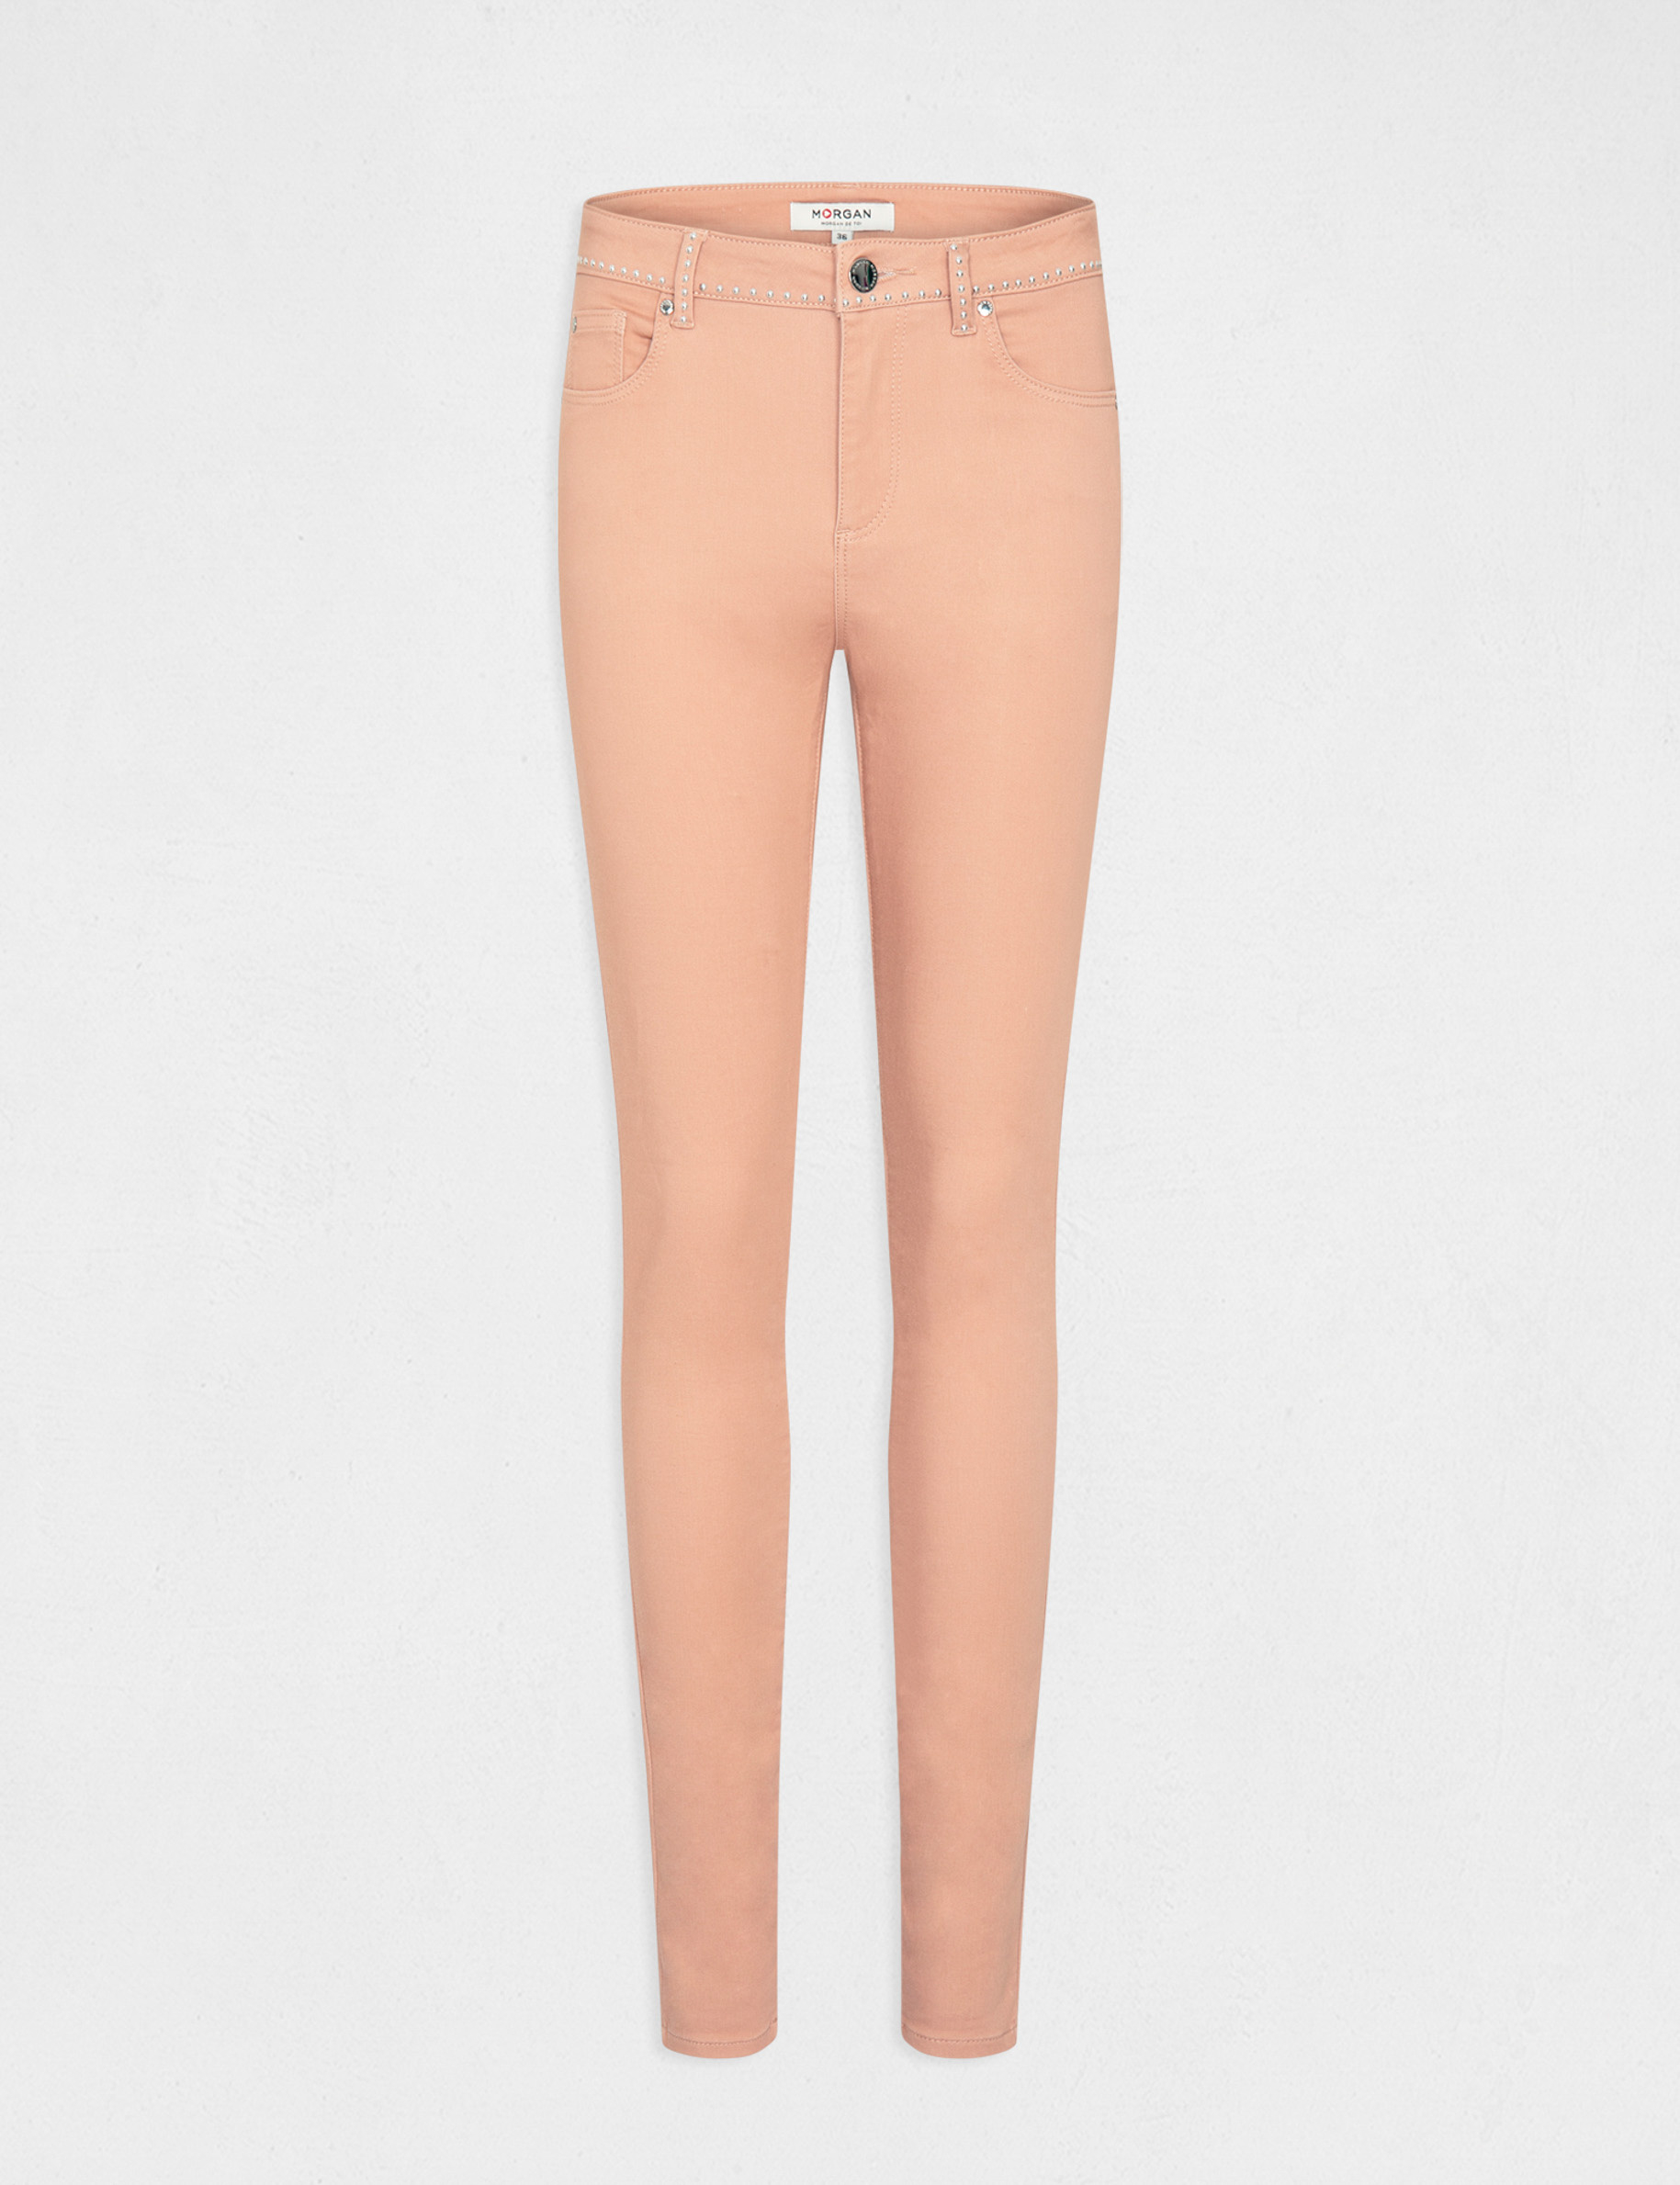 Slim trousers with studs antique pink ladies'